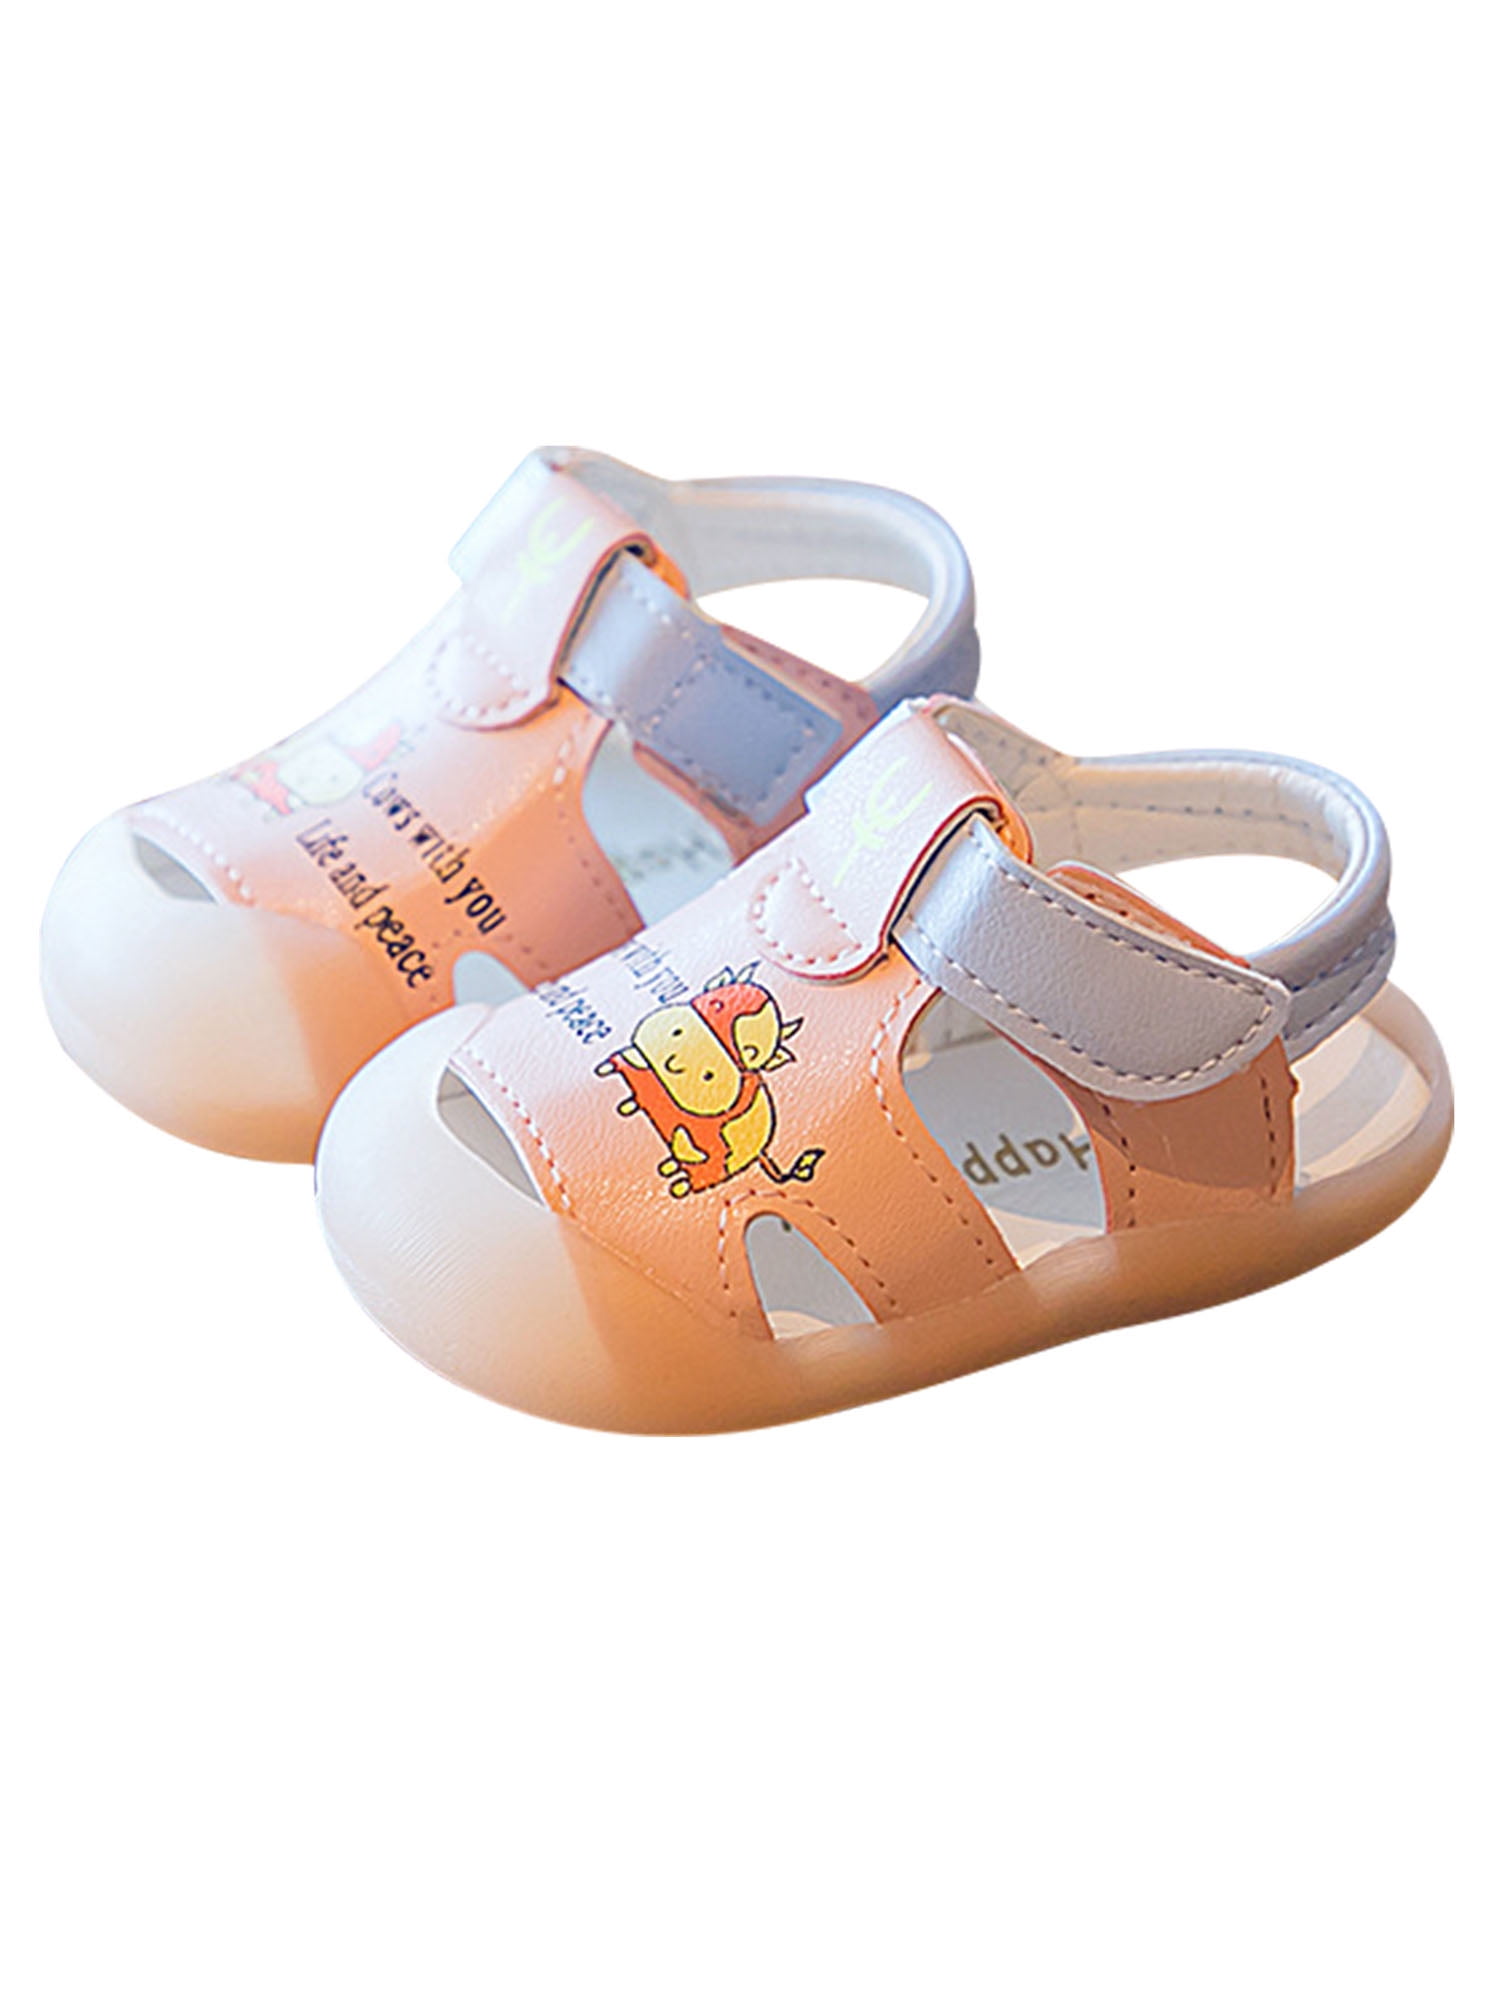 Anxinke Baby Toddler Girls Cartoon Hollowed-Out Casual Sandals